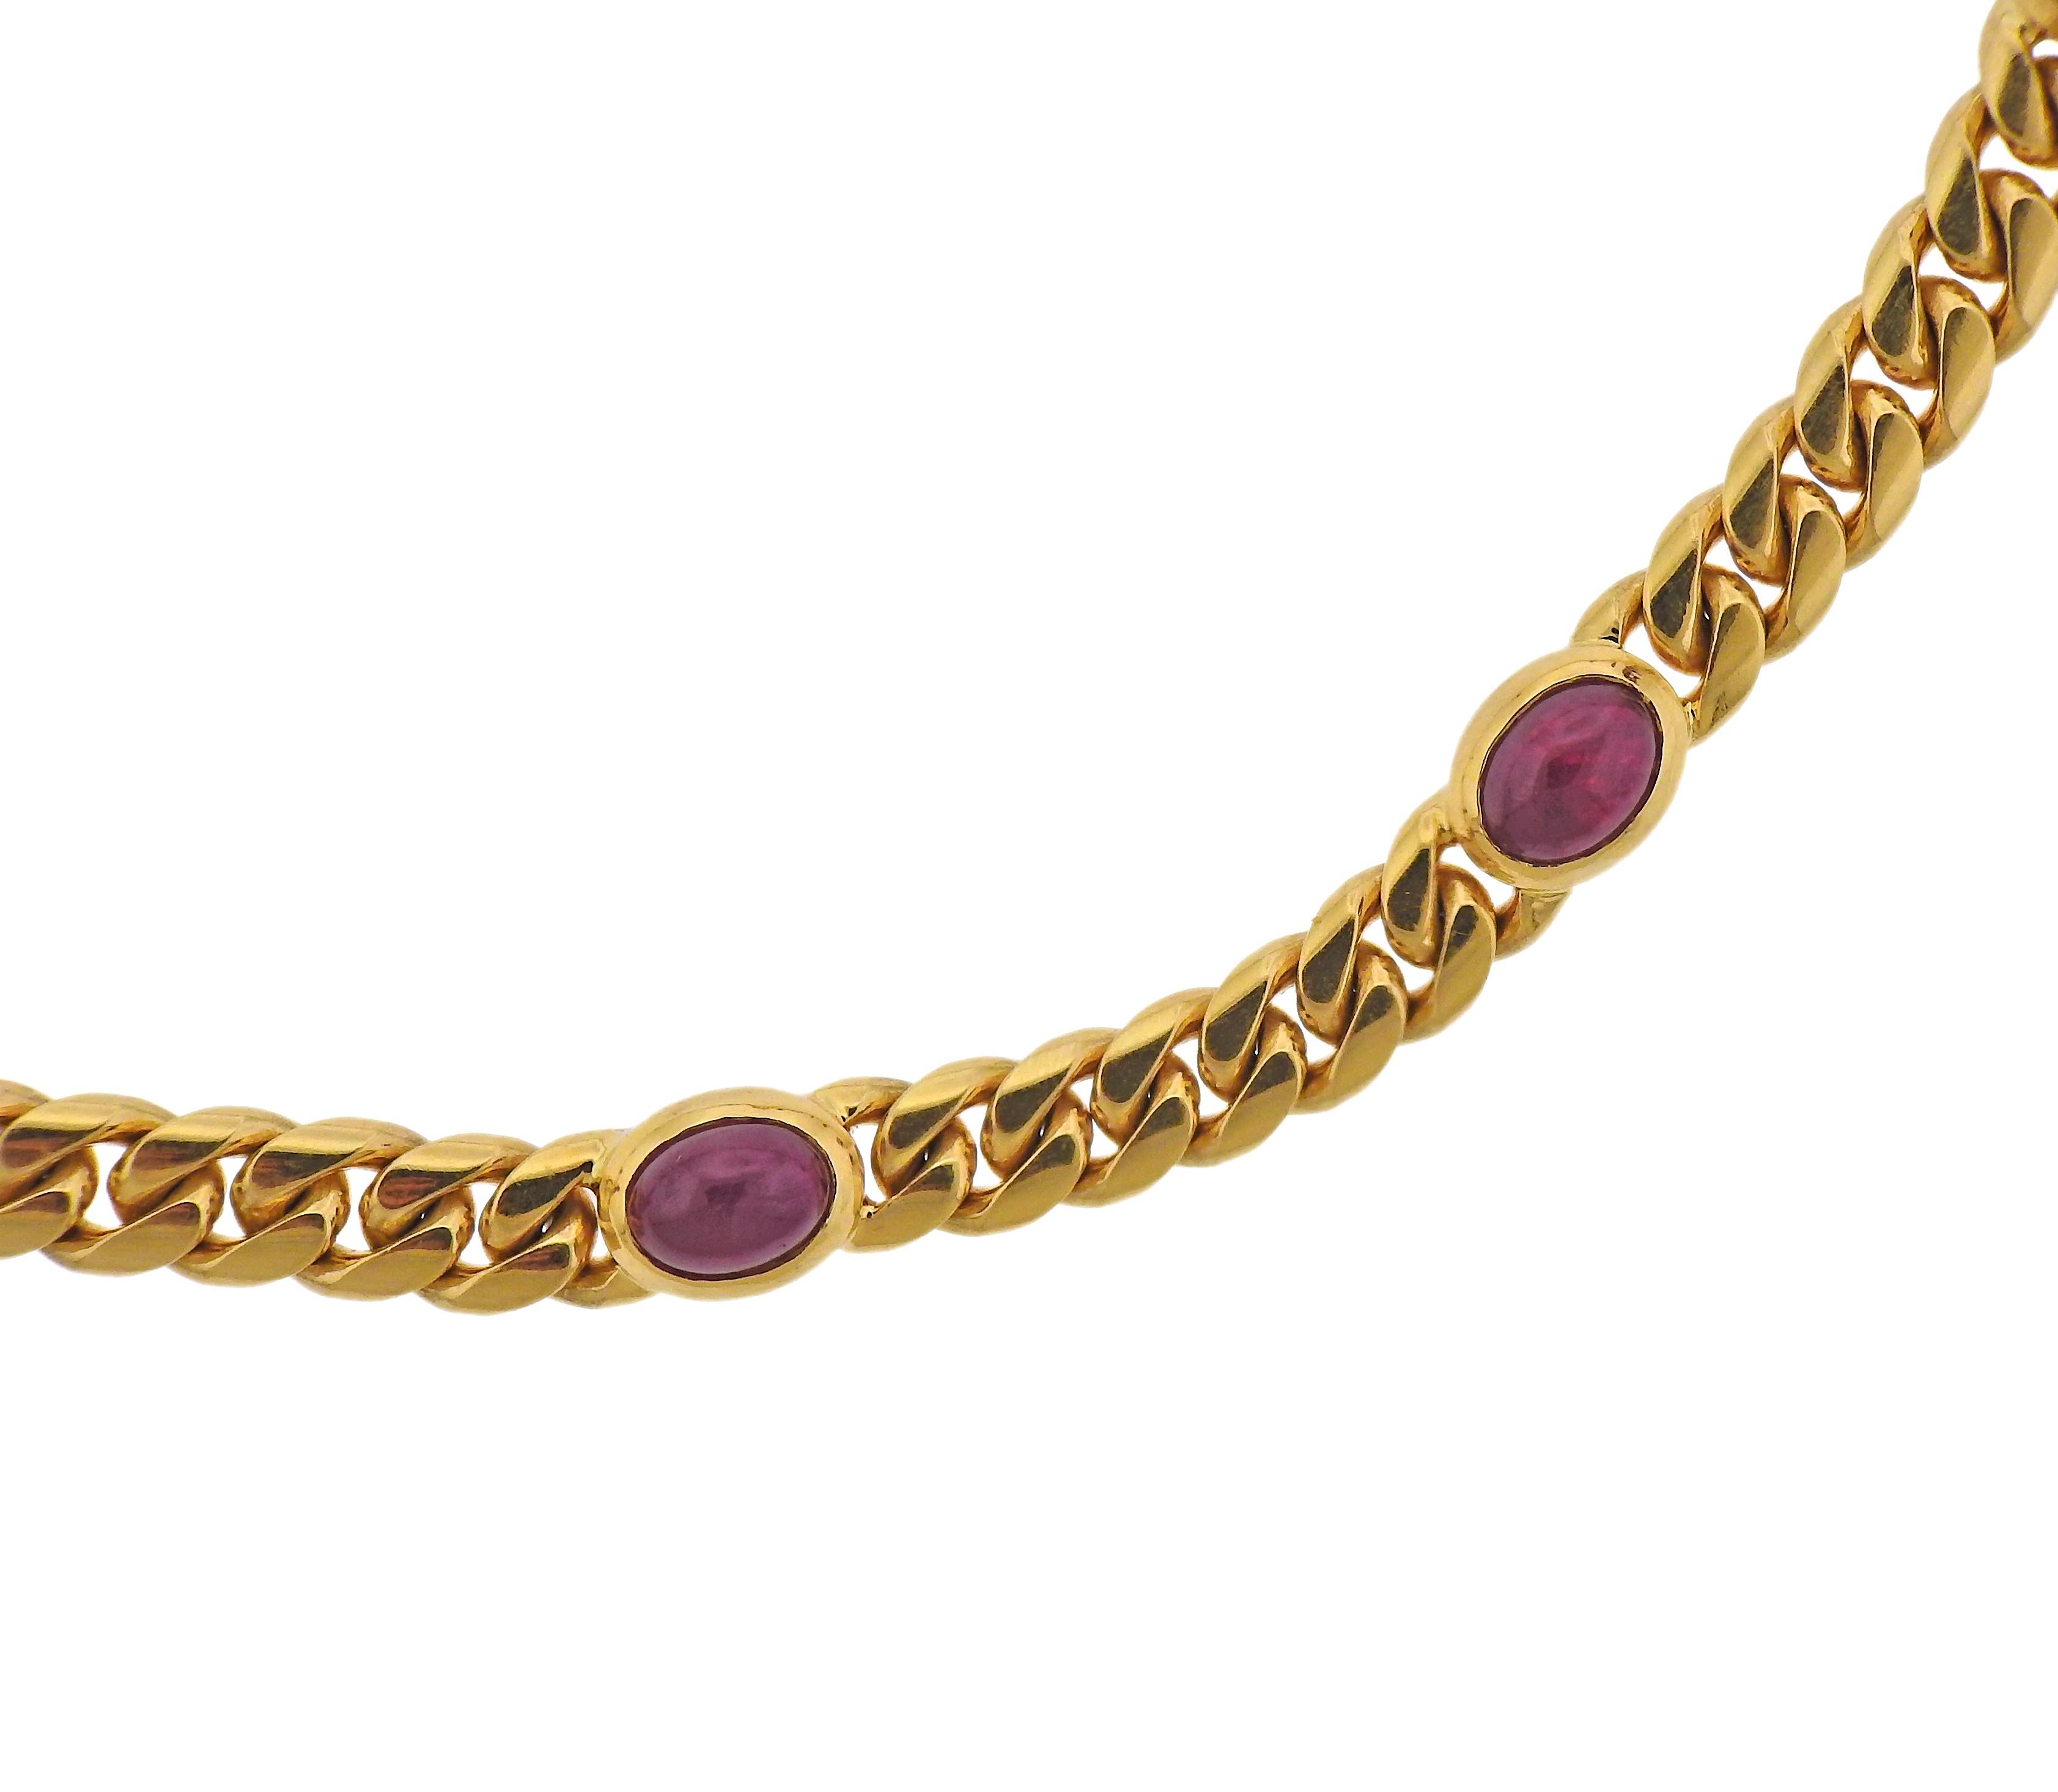 18k yellow gold curb link necklace by Bvlgari, set with ten oval ruby cabochons - 7.8mm x 6mm. Necklace is 17.5